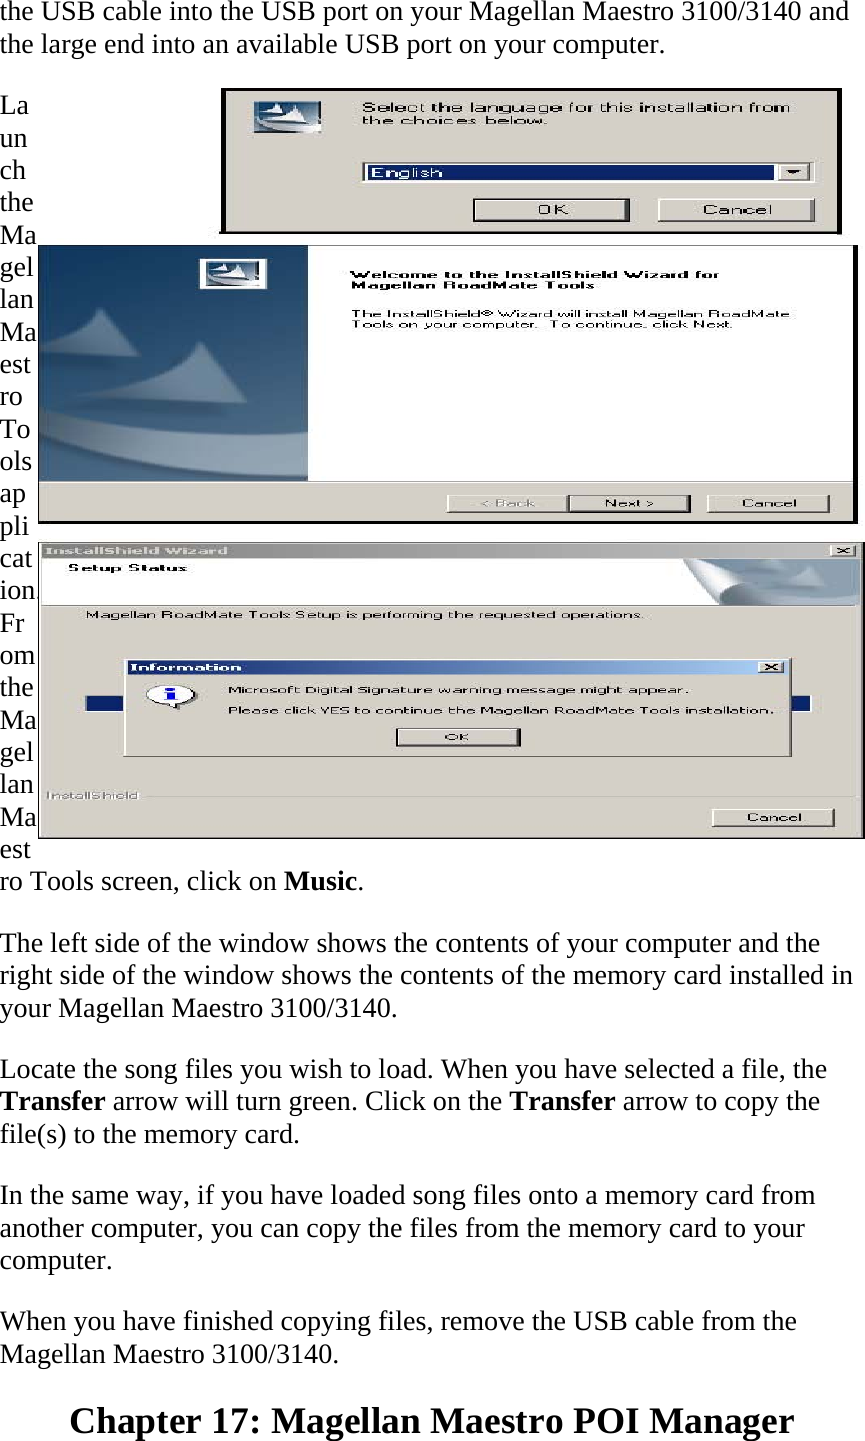 the USB cable into the USB port on your Magellan Maestro 3100/3140 and the large end into an available USB port on your computer.  Launch the Magellan Maestro Tools application. From the Magellan Maestro Tools screen, click on Music.  The left side of the window shows the contents of your computer and the right side of the window shows the contents of the memory card installed in your Magellan Maestro 3100/3140.  Locate the song files you wish to load. When you have selected a file, the Transfer arrow will turn green. Click on the Transfer arrow to copy the file(s) to the memory card.  In the same way, if you have loaded song files onto a memory card from another computer, you can copy the files from the memory card to your computer.  When you have finished copying files, remove the USB cable from the Magellan Maestro 3100/3140.  Chapter 17: Magellan Maestro POI Manager  